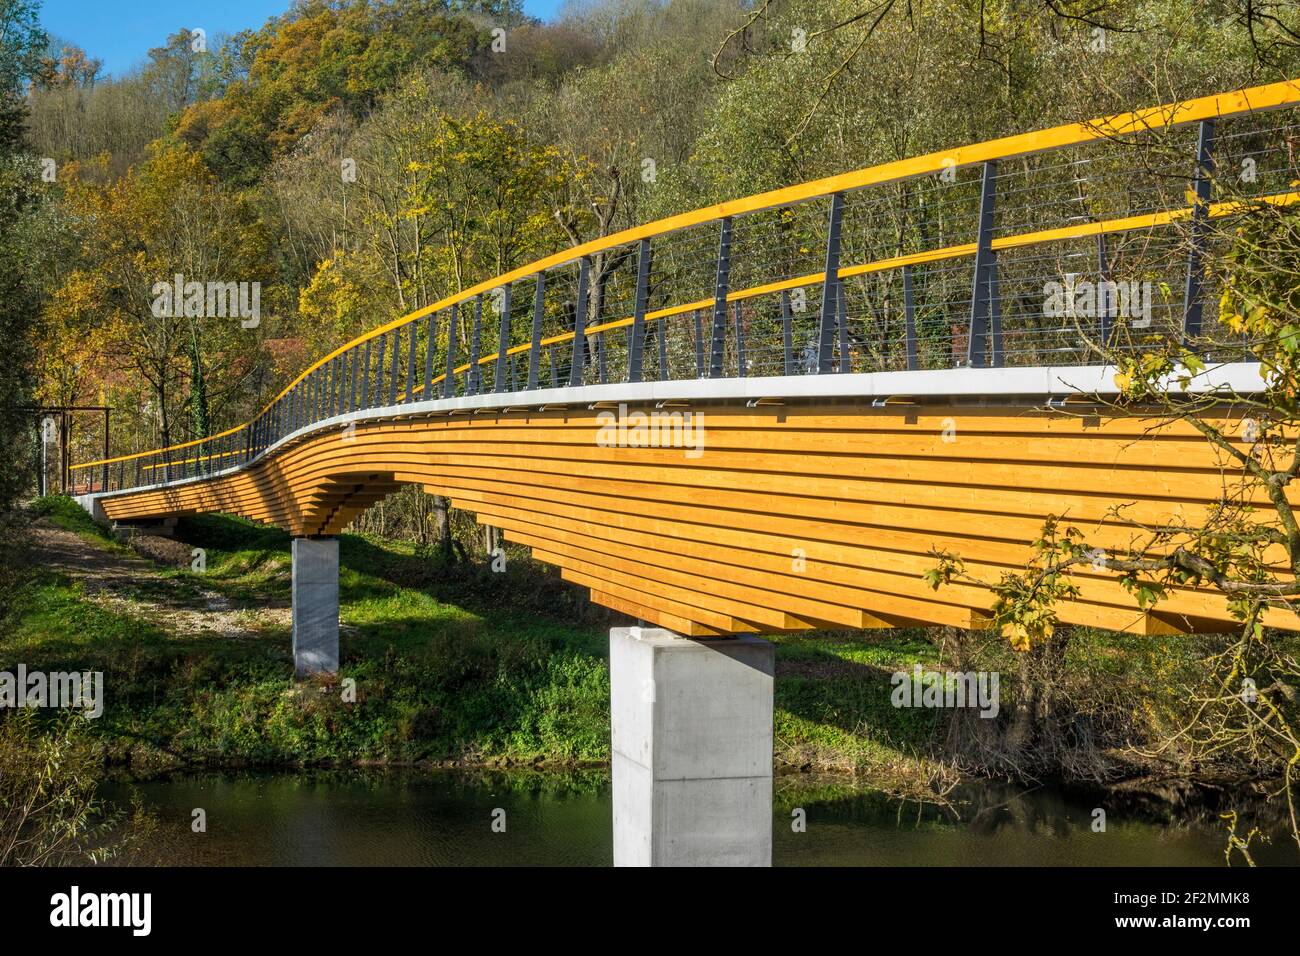 Germany, Baden-Wuerttemberg, Neckartenzlingen, the pedestrian and cycle path bridge opened in July 2017. is a 3-field block girder bridge made of glued laminated timber. The Neckar Valley Cycle Path crosses the Neckar on the 96 m long bridge. Wood consumption approx. 230 m3, CO2 balance approx. 230 tons Stock Photo